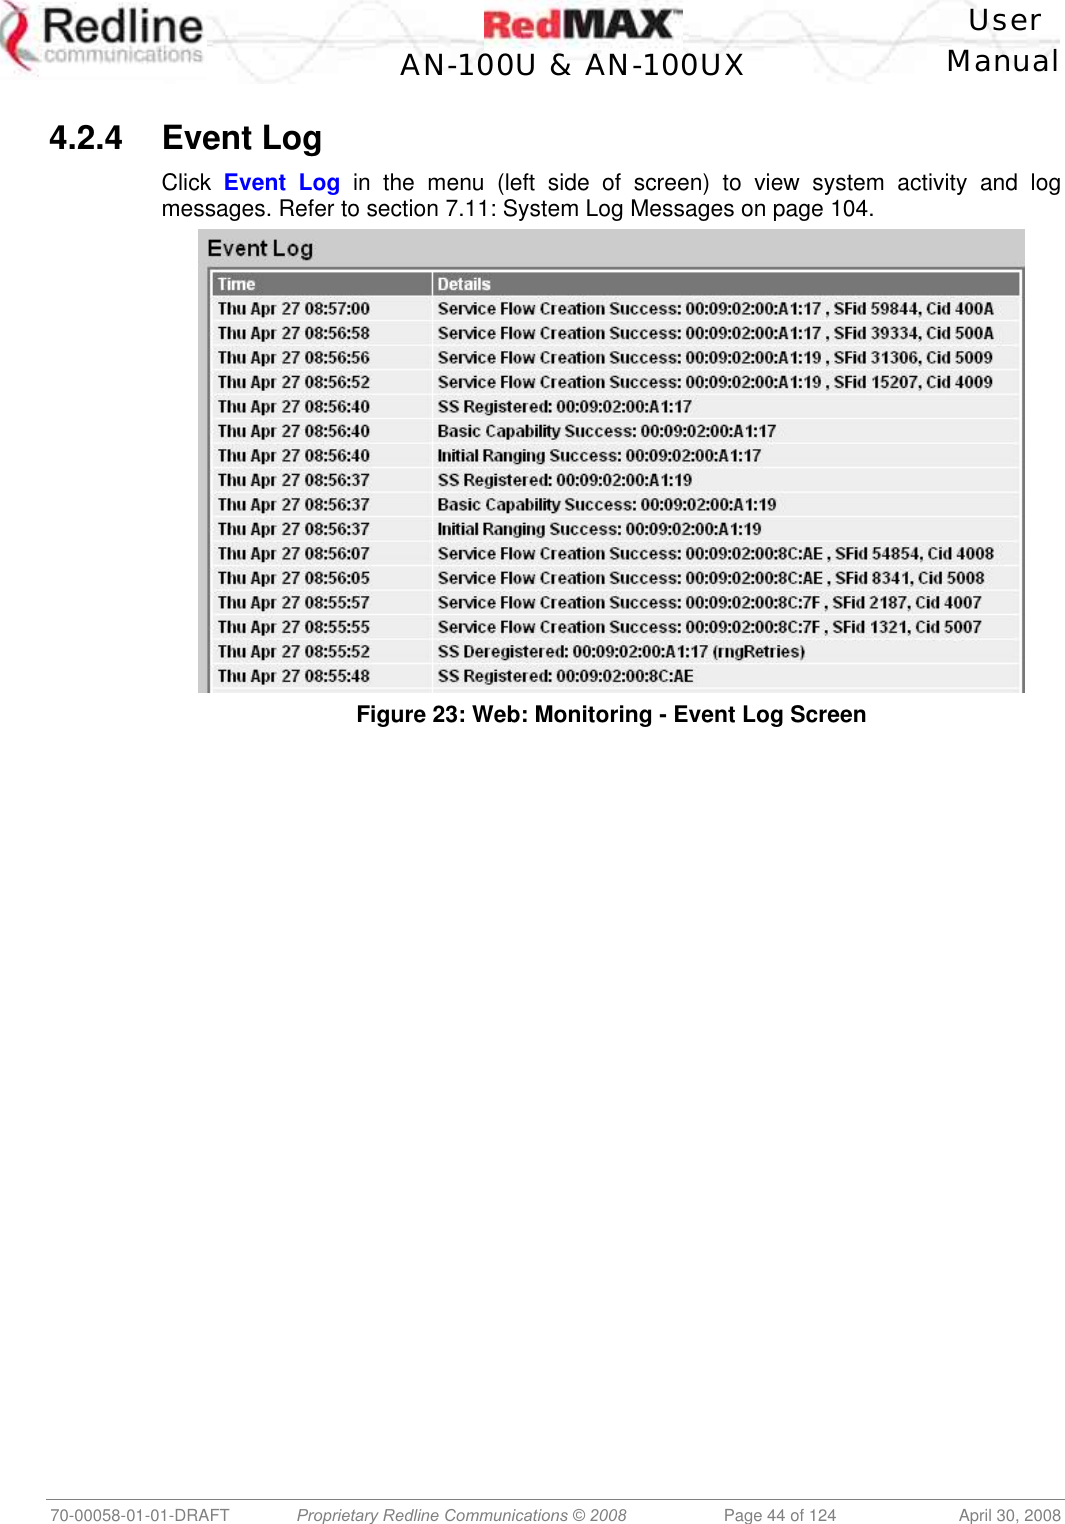    User  AN-100U &amp; AN-100UX Manual   70-00058-01-01-DRAFT  Proprietary Redline Communications © 2008   Page 44 of 124  April 30, 2008  4.2.4 Event Log Click  Event Log in the menu (left side of screen) to view system activity and log messages. Refer to section 7.11: System Log Messages on page 104.  Figure 23: Web: Monitoring - Event Log Screen 